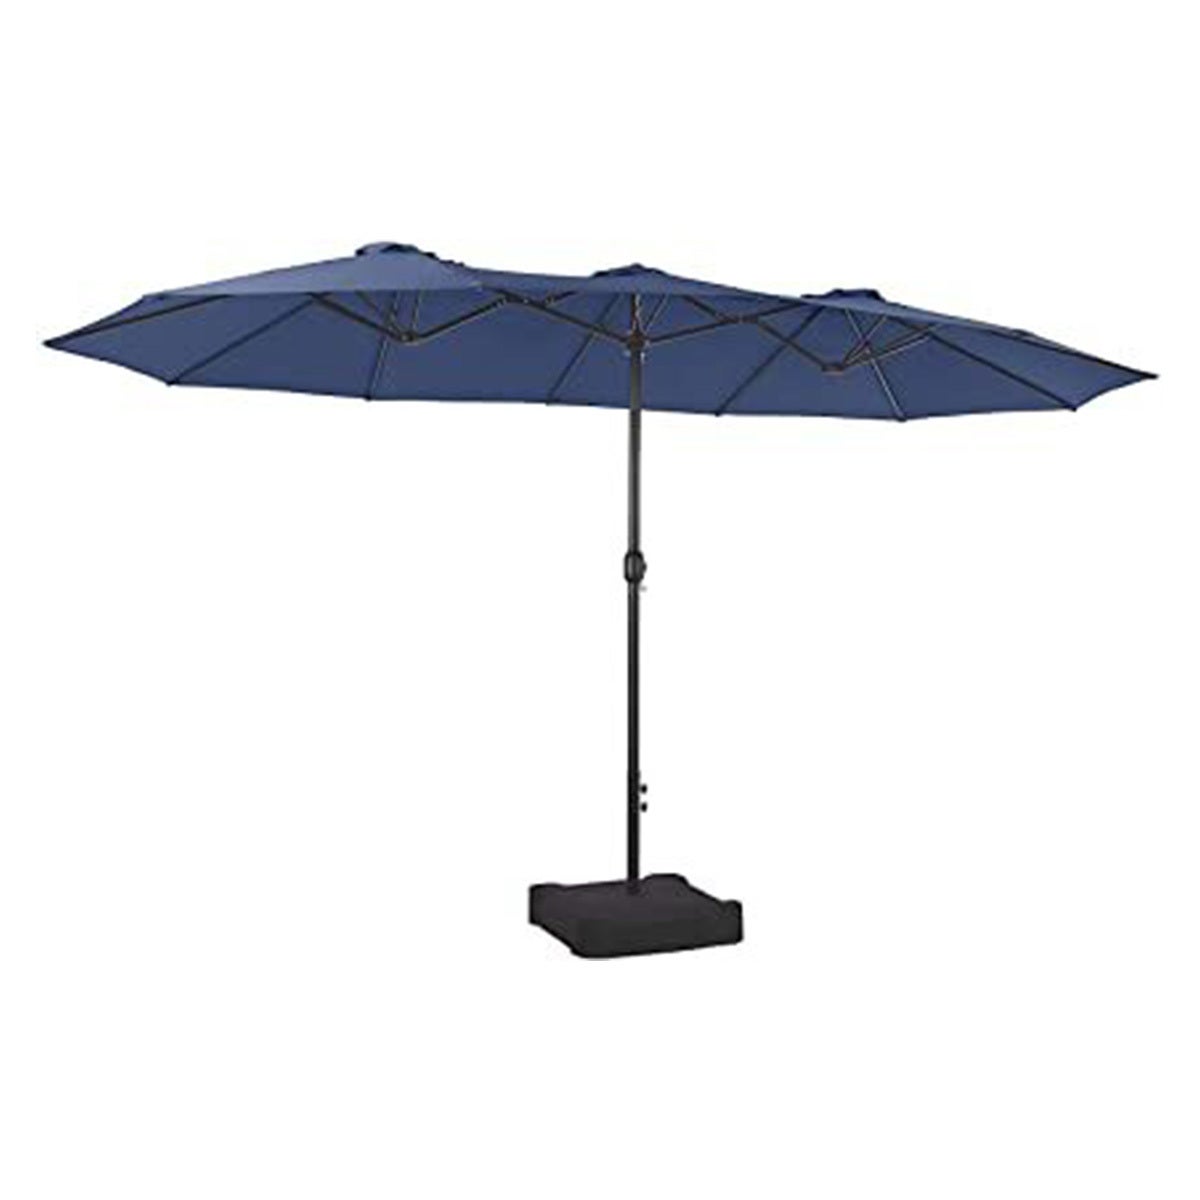 A 15-Foot, Fade-Resistant Patio Umbrella Tops Our Amazon Prime Day Wish List